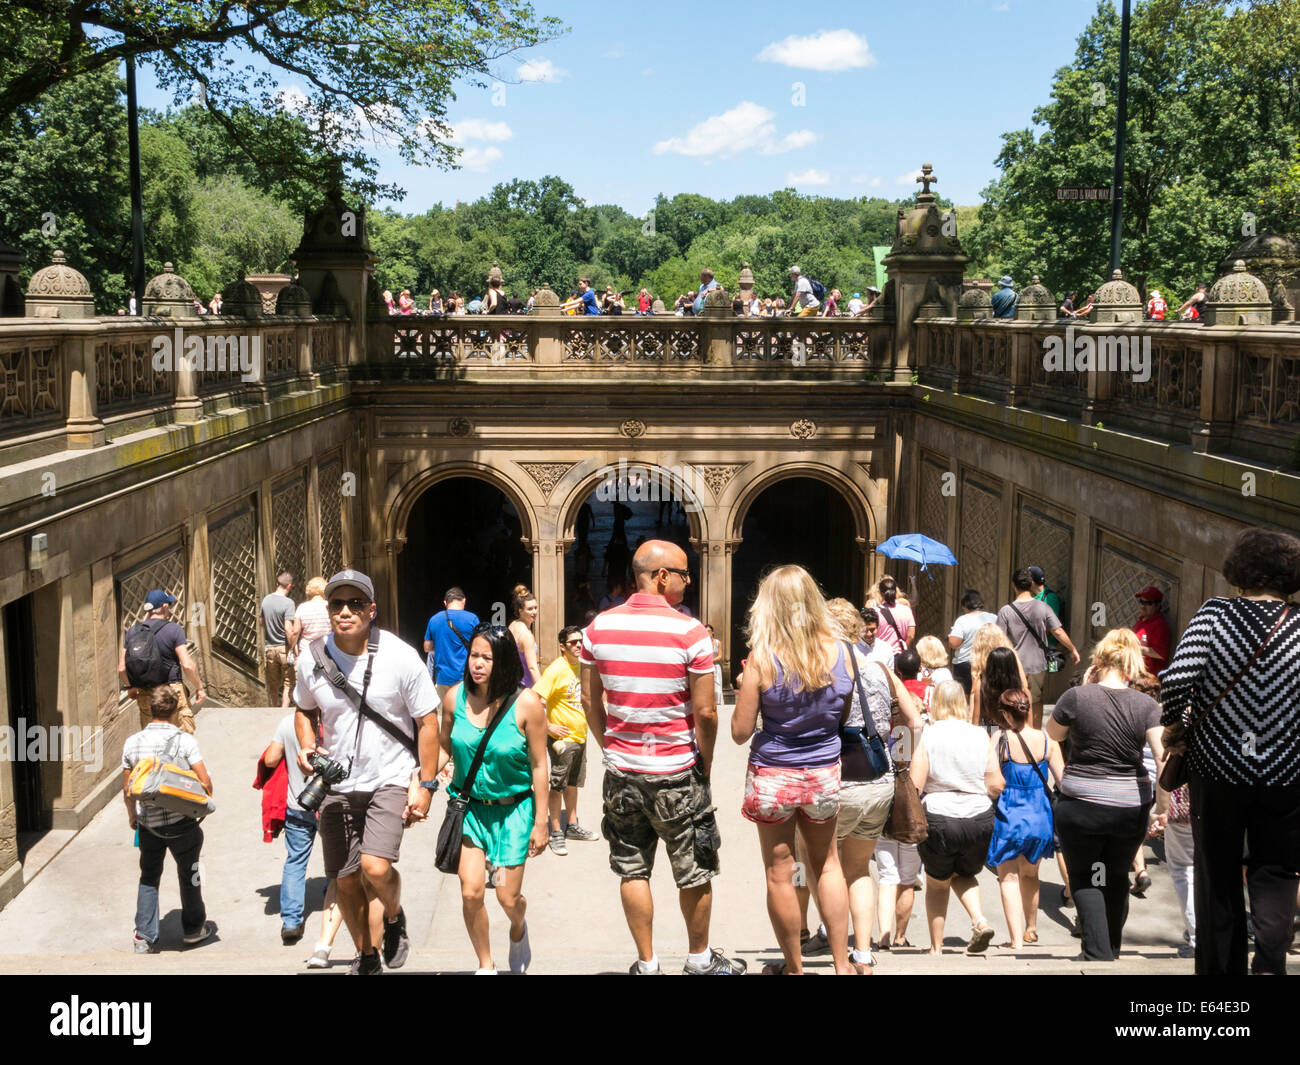 Bethesda Terrace Grand Staircase in Central Park Editorial